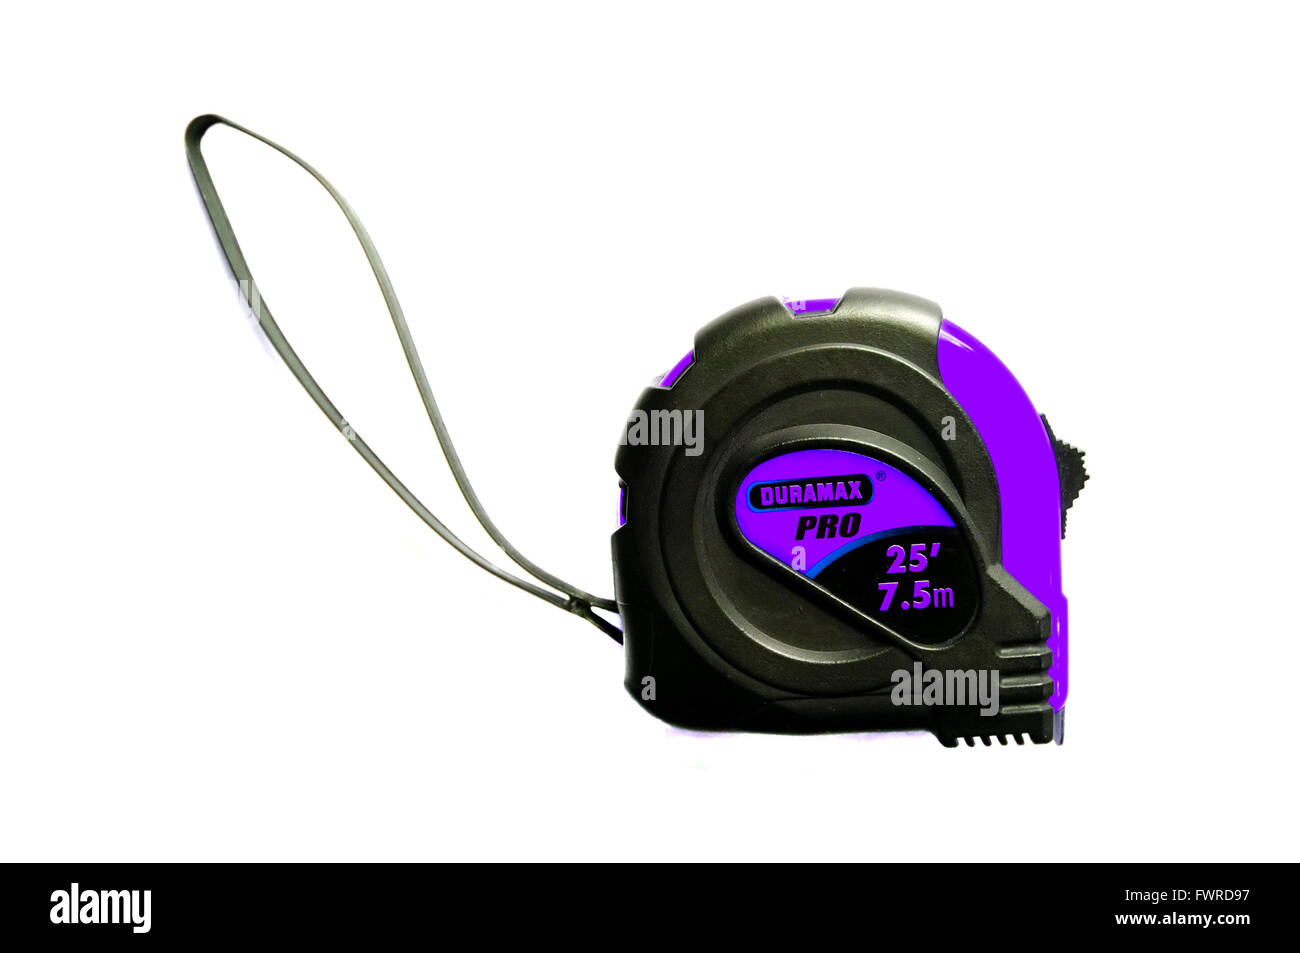 https://c8.alamy.com/comp/FWRD97/a-purple-measuring-tape-photographed-against-a-white-background-FWRD97.jpg